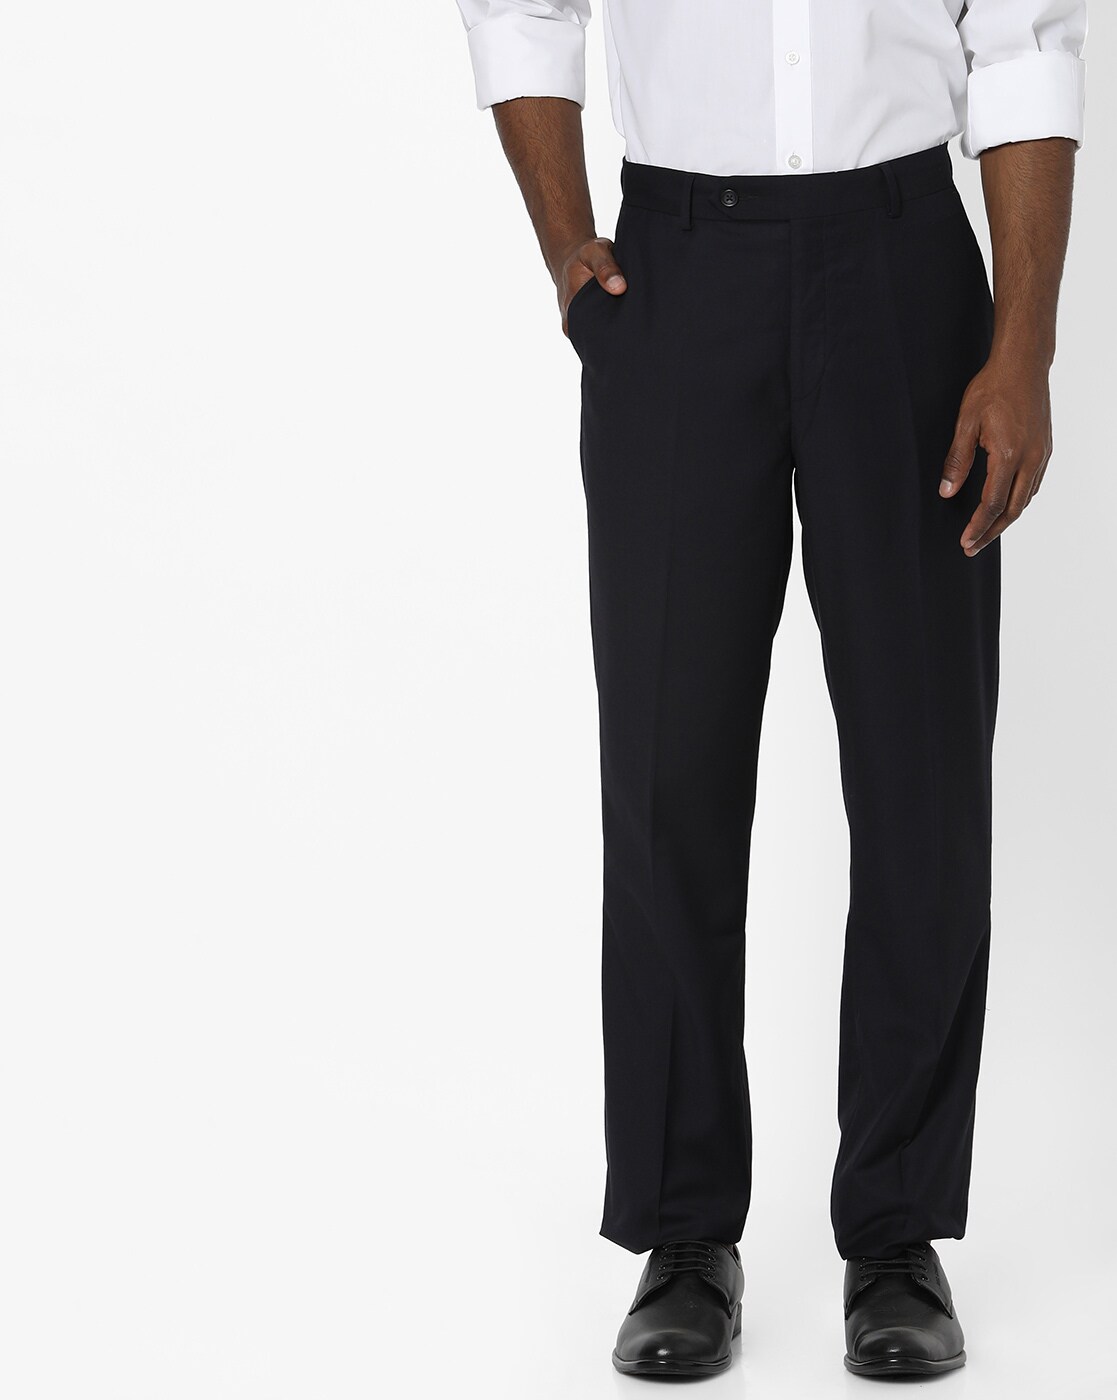 Buy Navy Blue Trousers  Pants for Men by Wills Lifestyle Online  Ajiocom